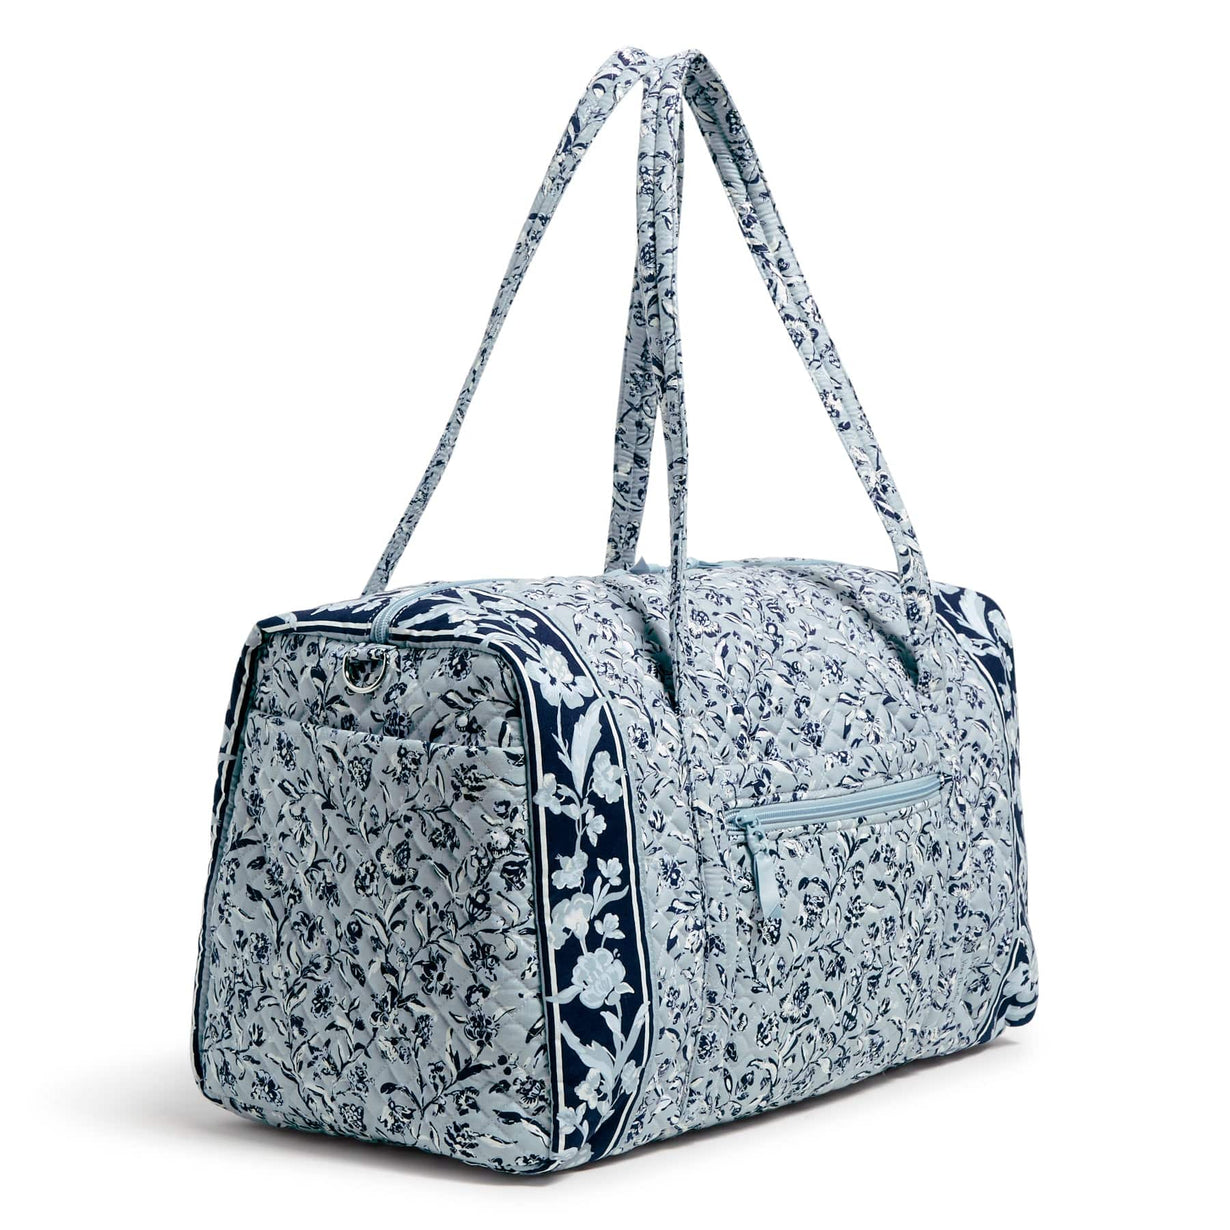 So many fashion girls own this supersized quilted shopping bag